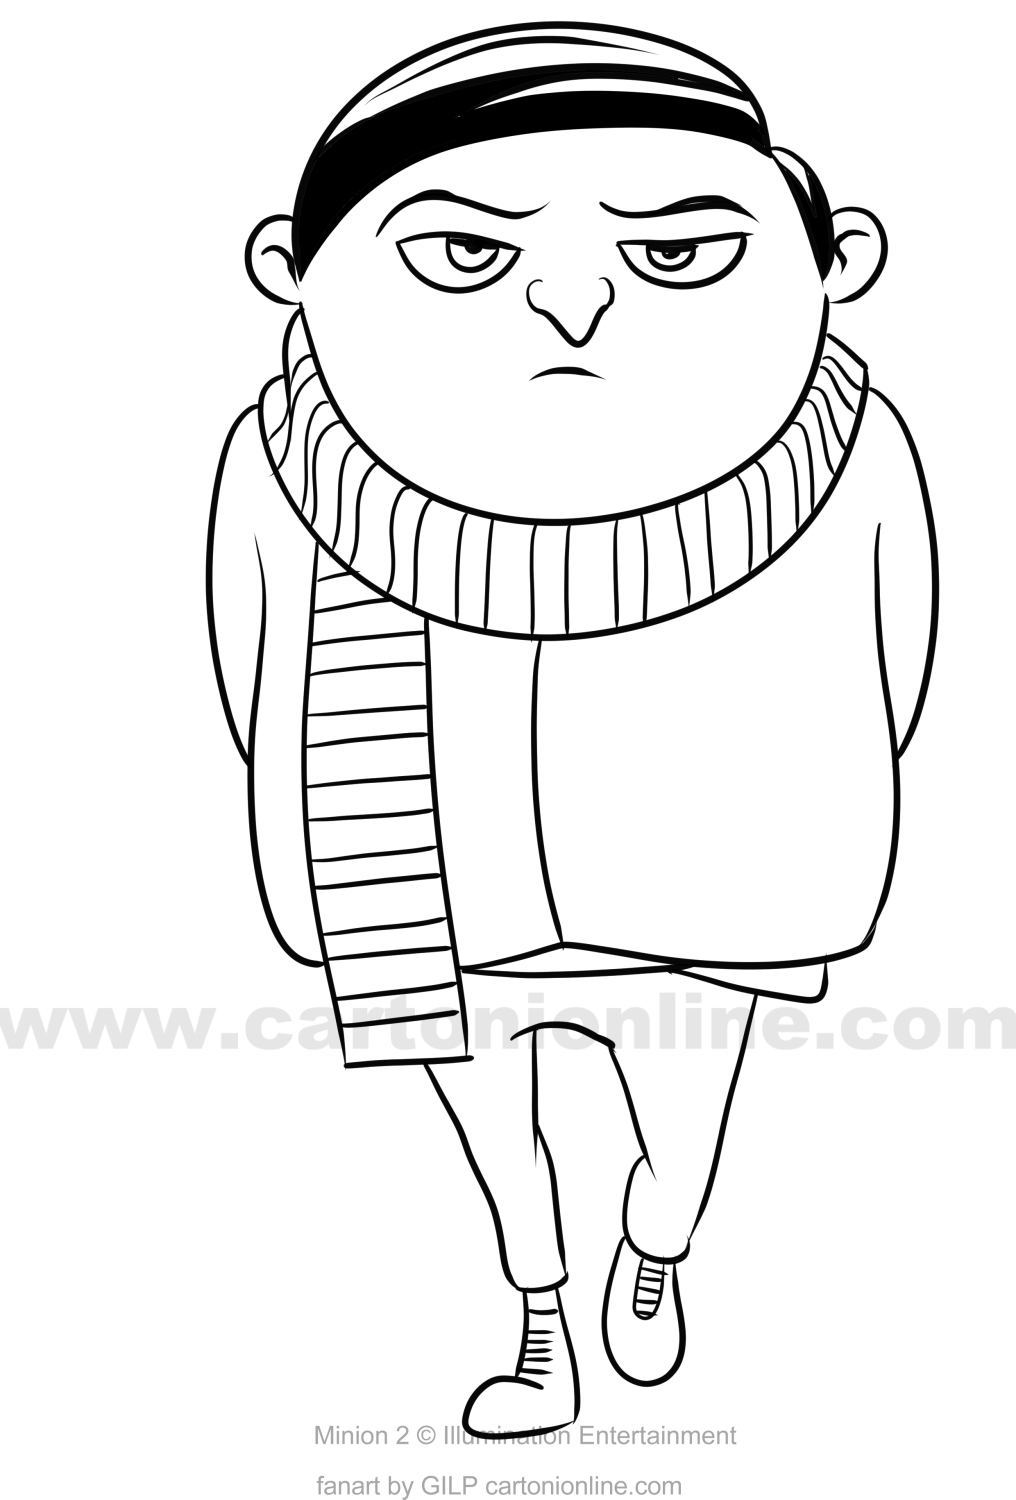 Gru from minions the rise of gru coloring page